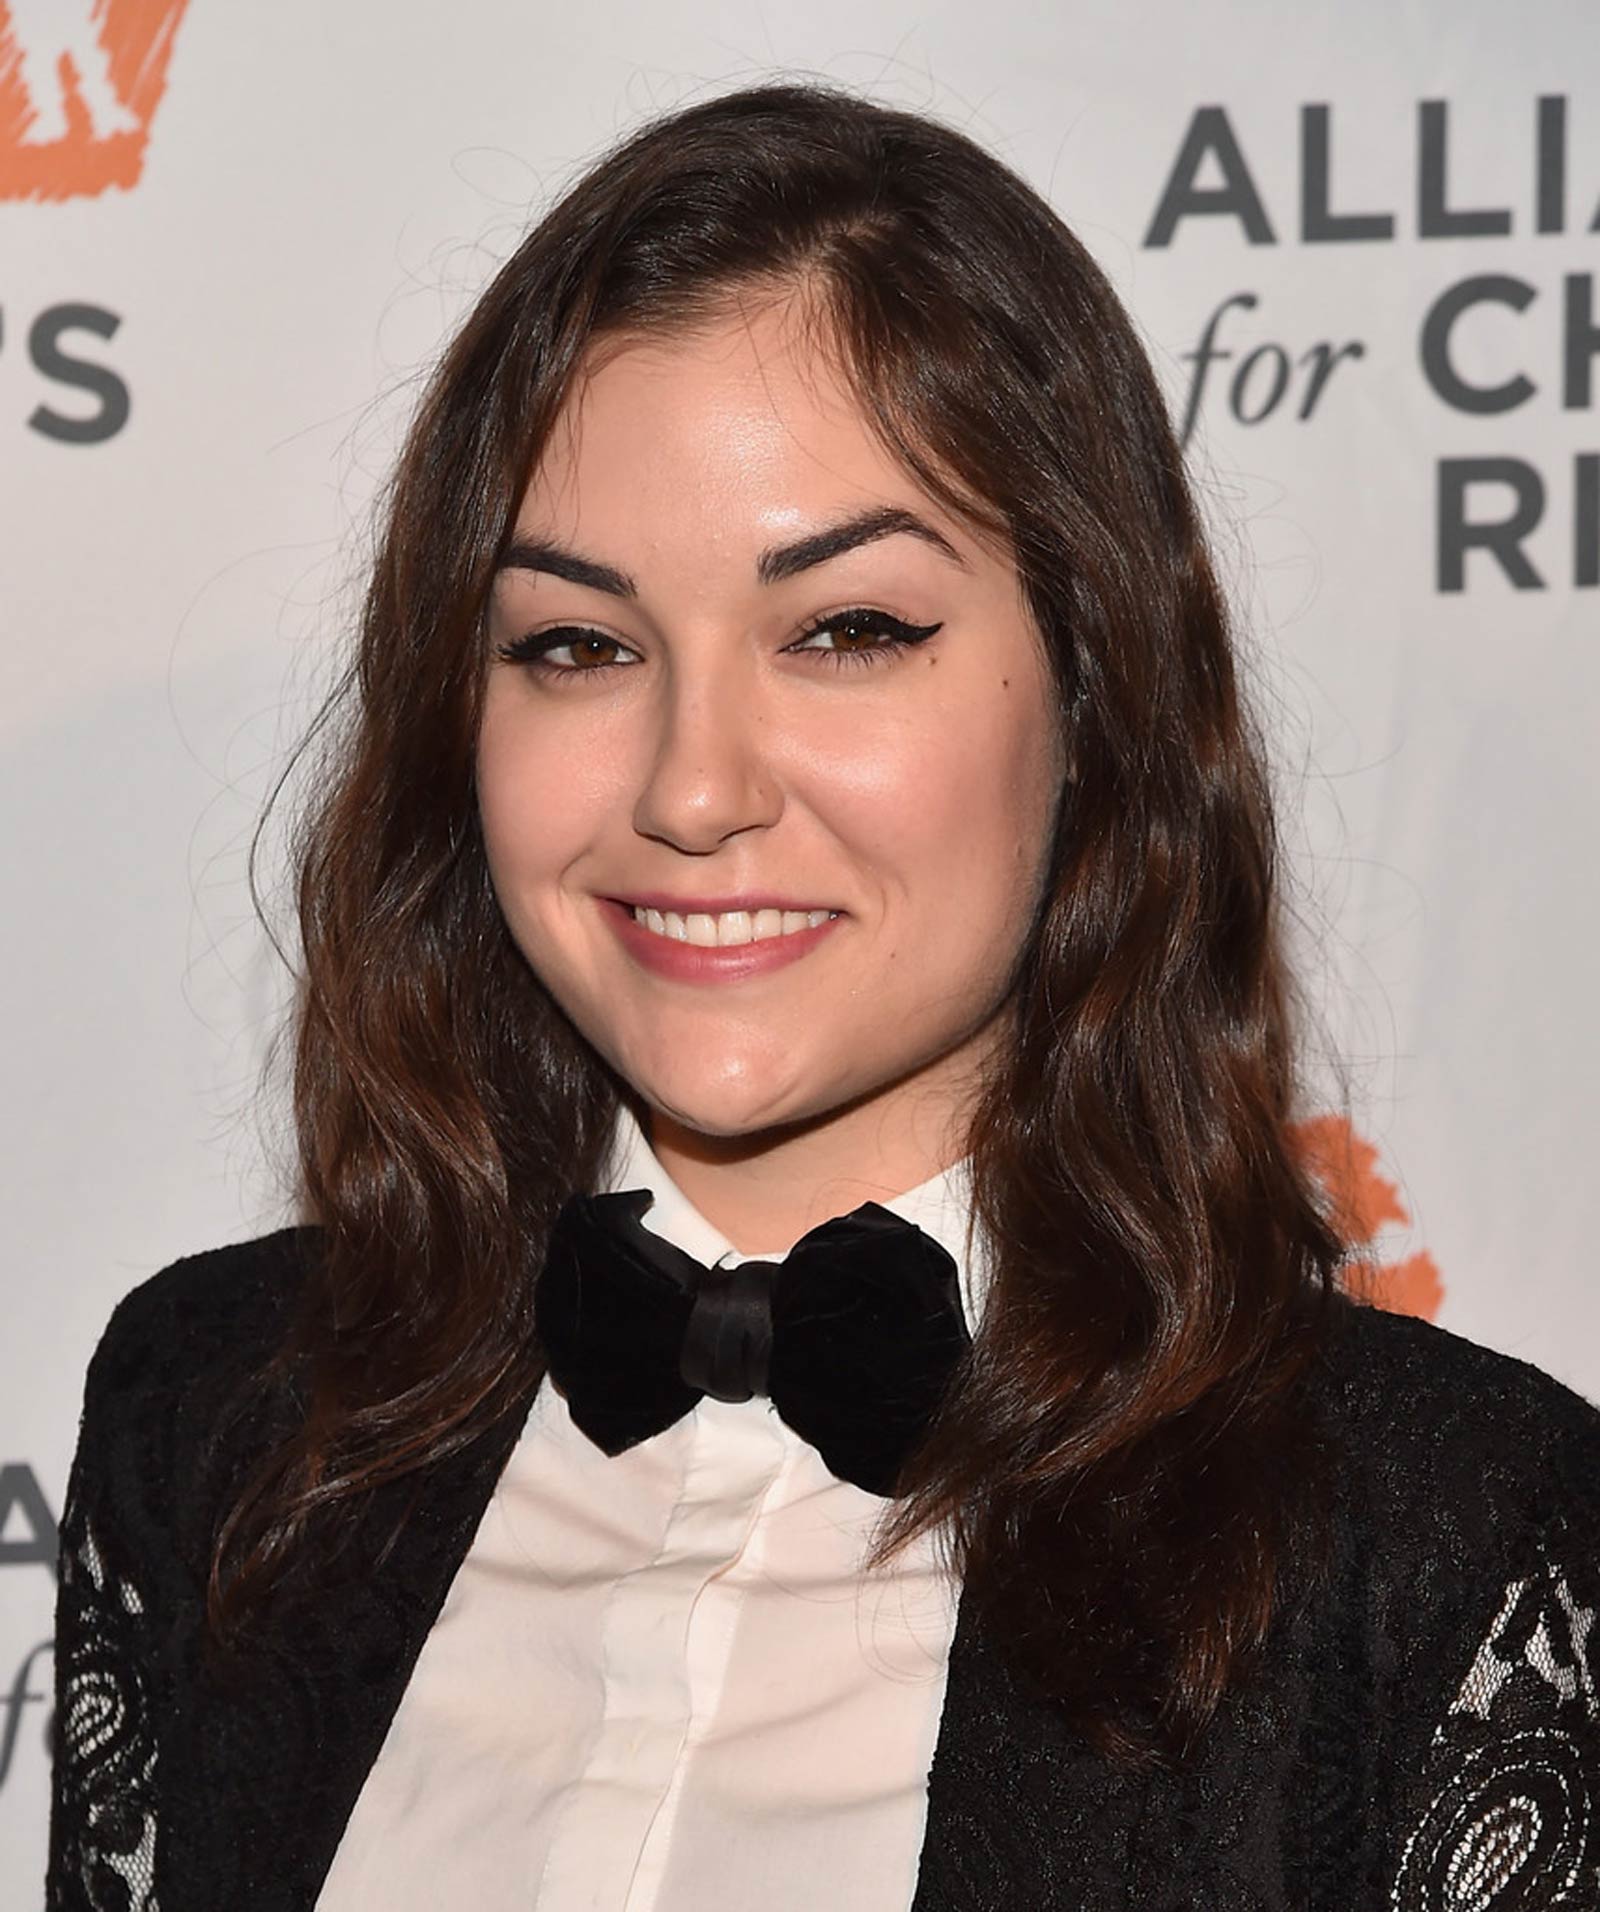 Sasha Grey attends The Alliance For Children’s Rights To Laugh